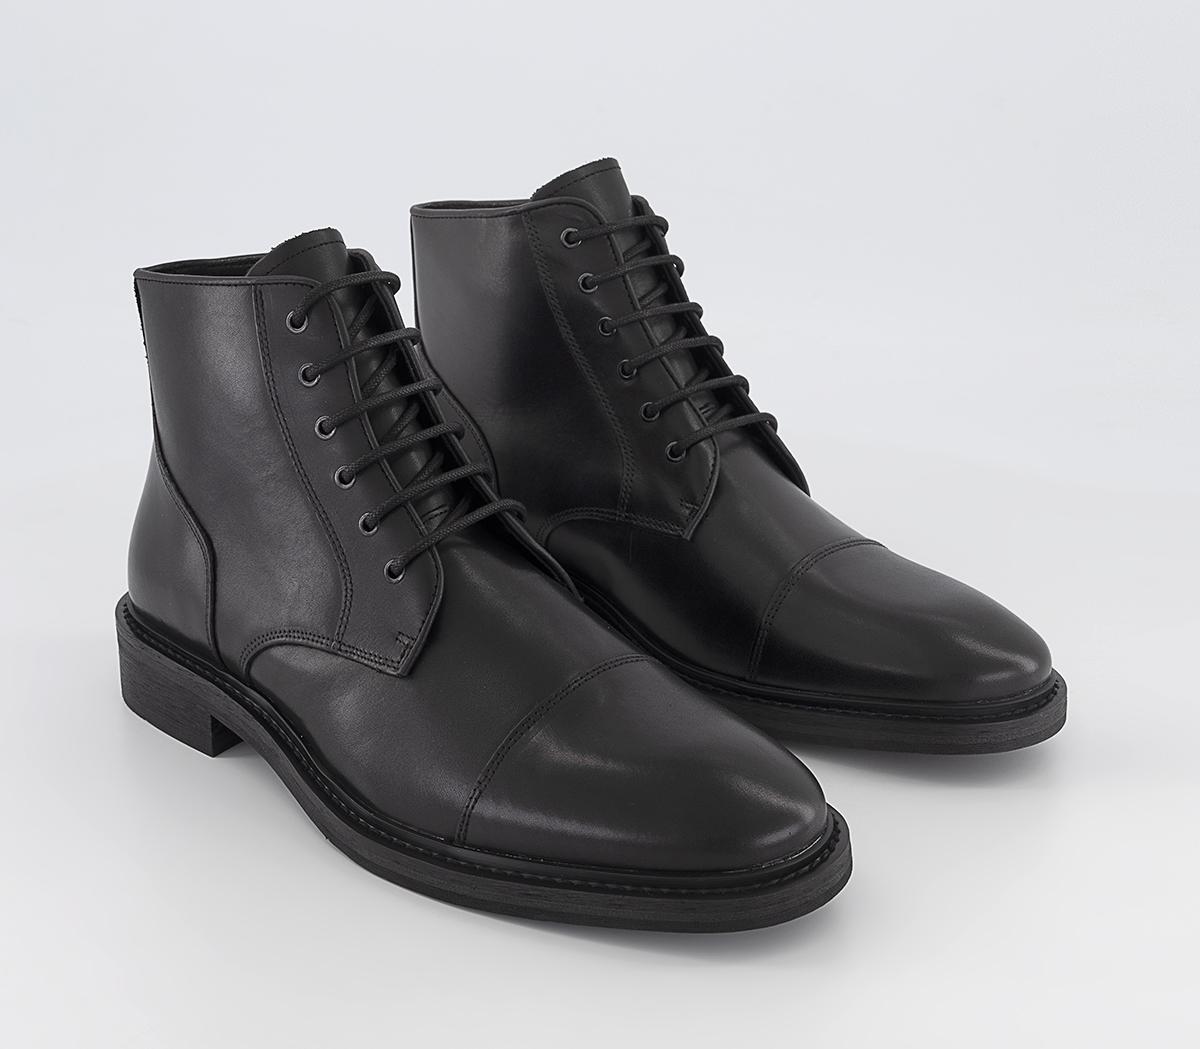 OFFICE Barnsley Toecap Ankle Boots Black Leather - Men’s Boots